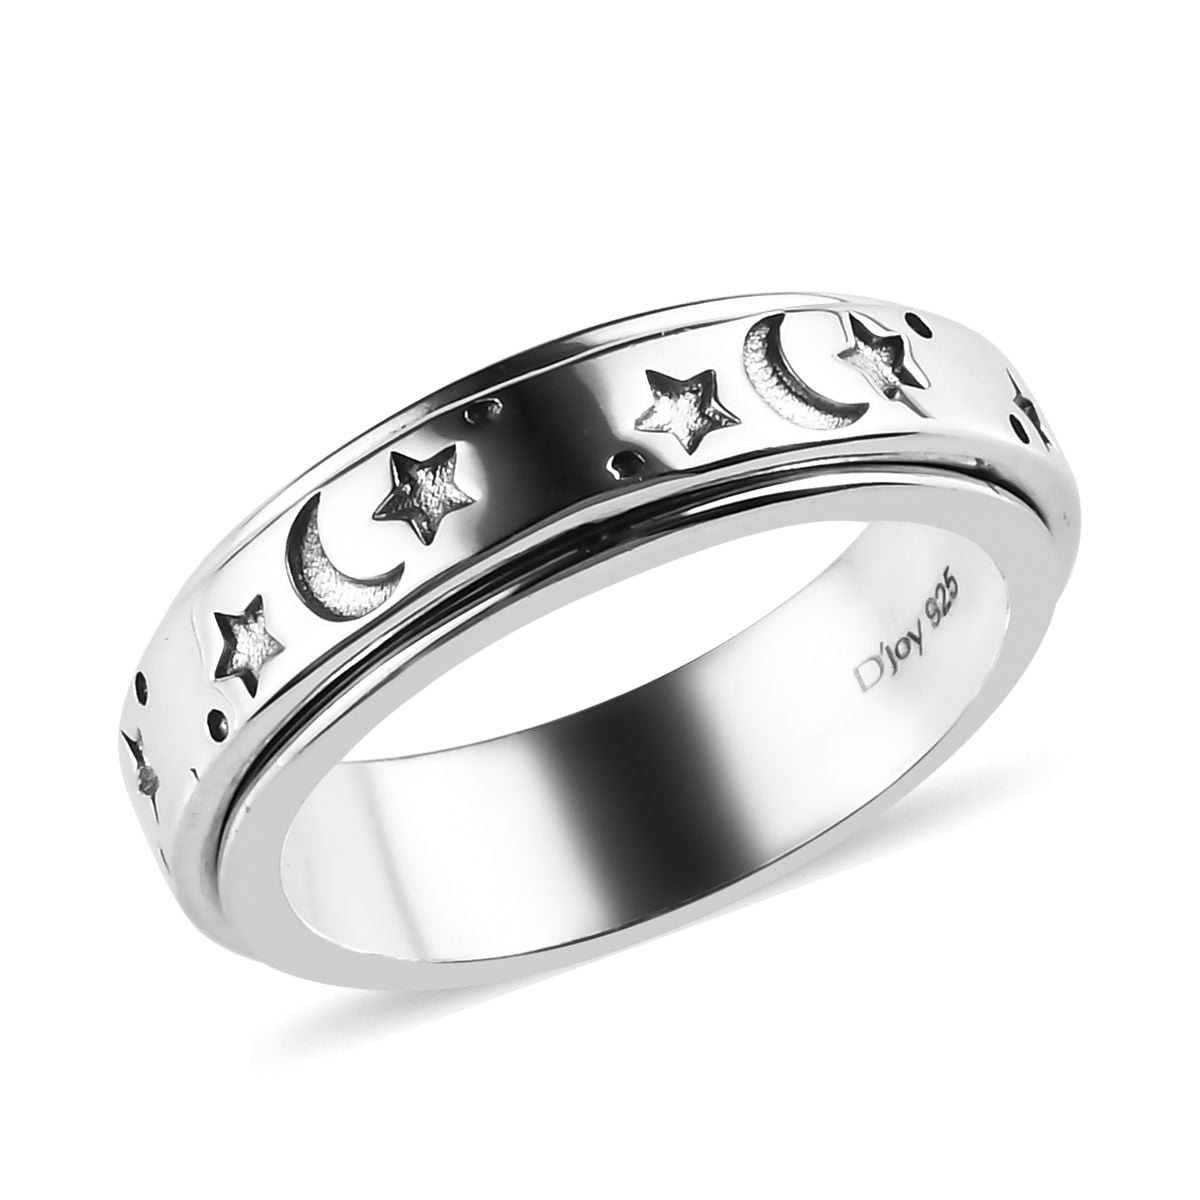 Shop LC - Mens Womens Spinner Band Ring 925 Sterling Silver Statement ...